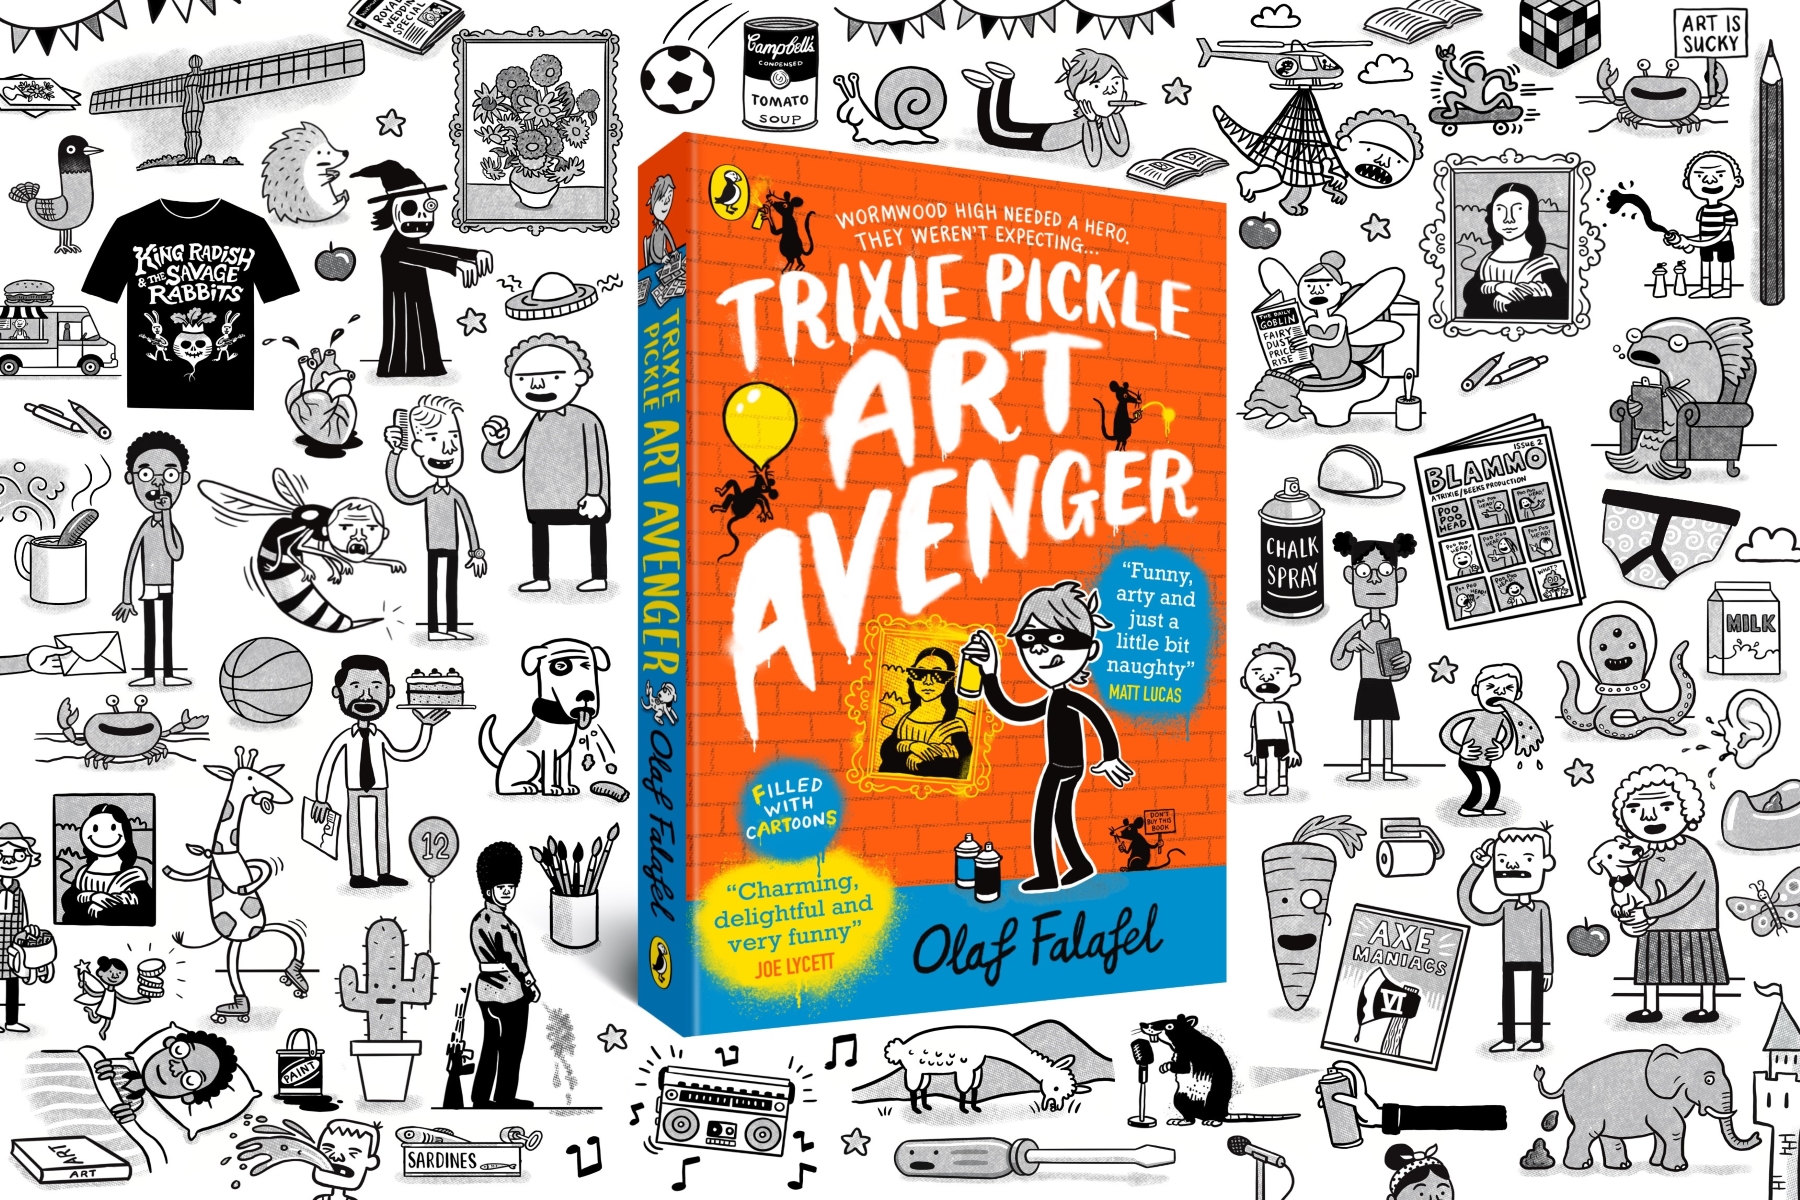 An image of the Trixie Pickle Art Avenger by Olaf Falafel on top of a doodled background